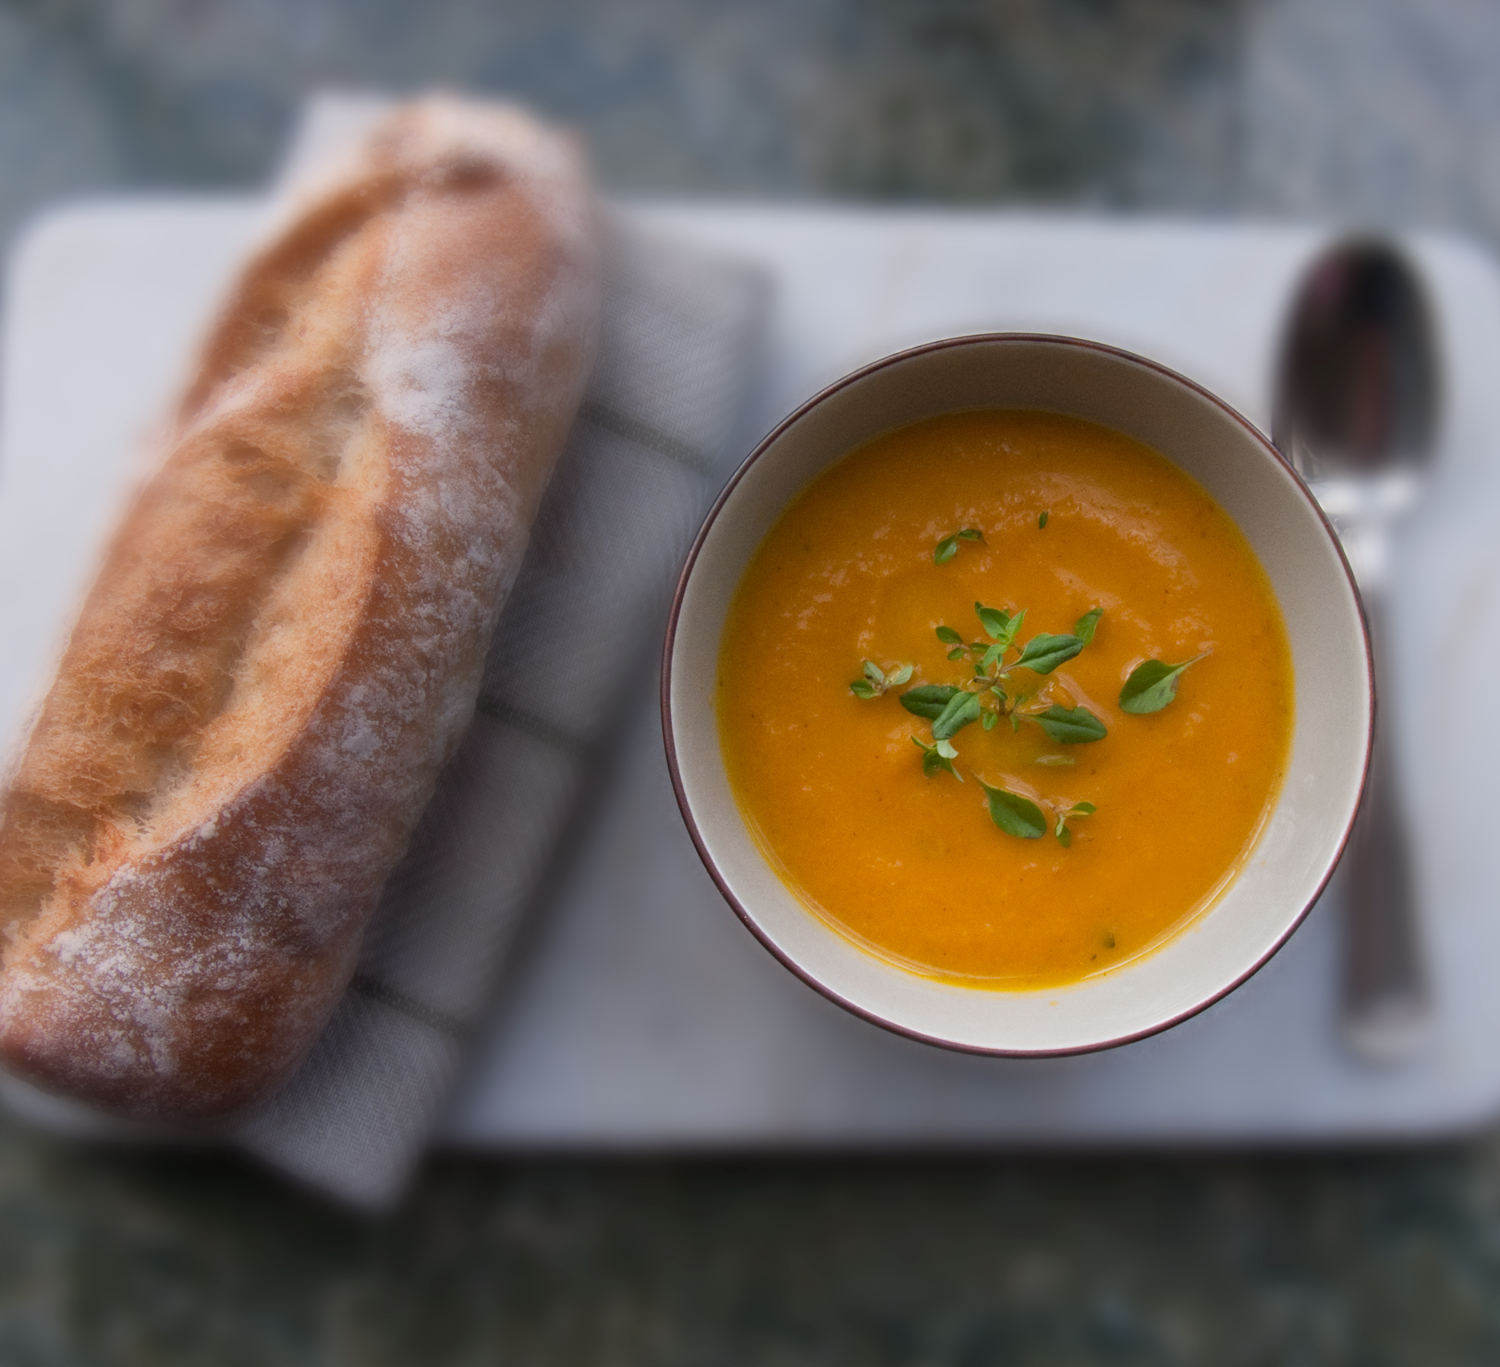 Carrot Soup With A Taste Of Ginger